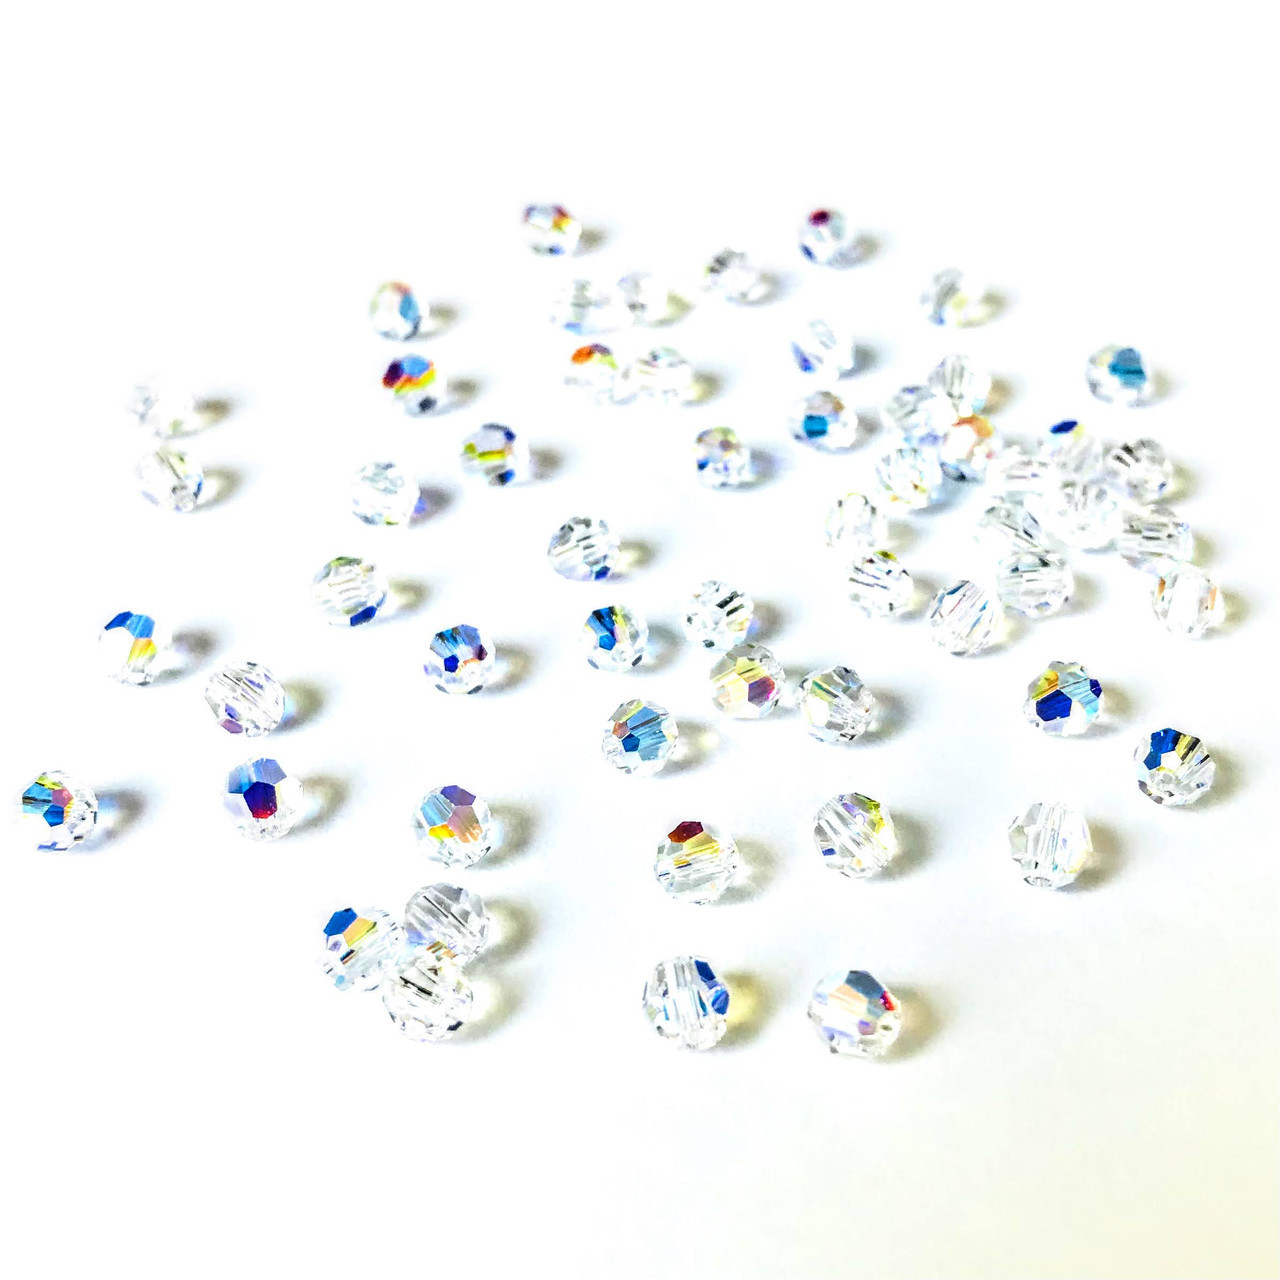 5 Mm ROUND 5000 Swarovski Crystal Beads. Choose Color and Quantity -   Canada